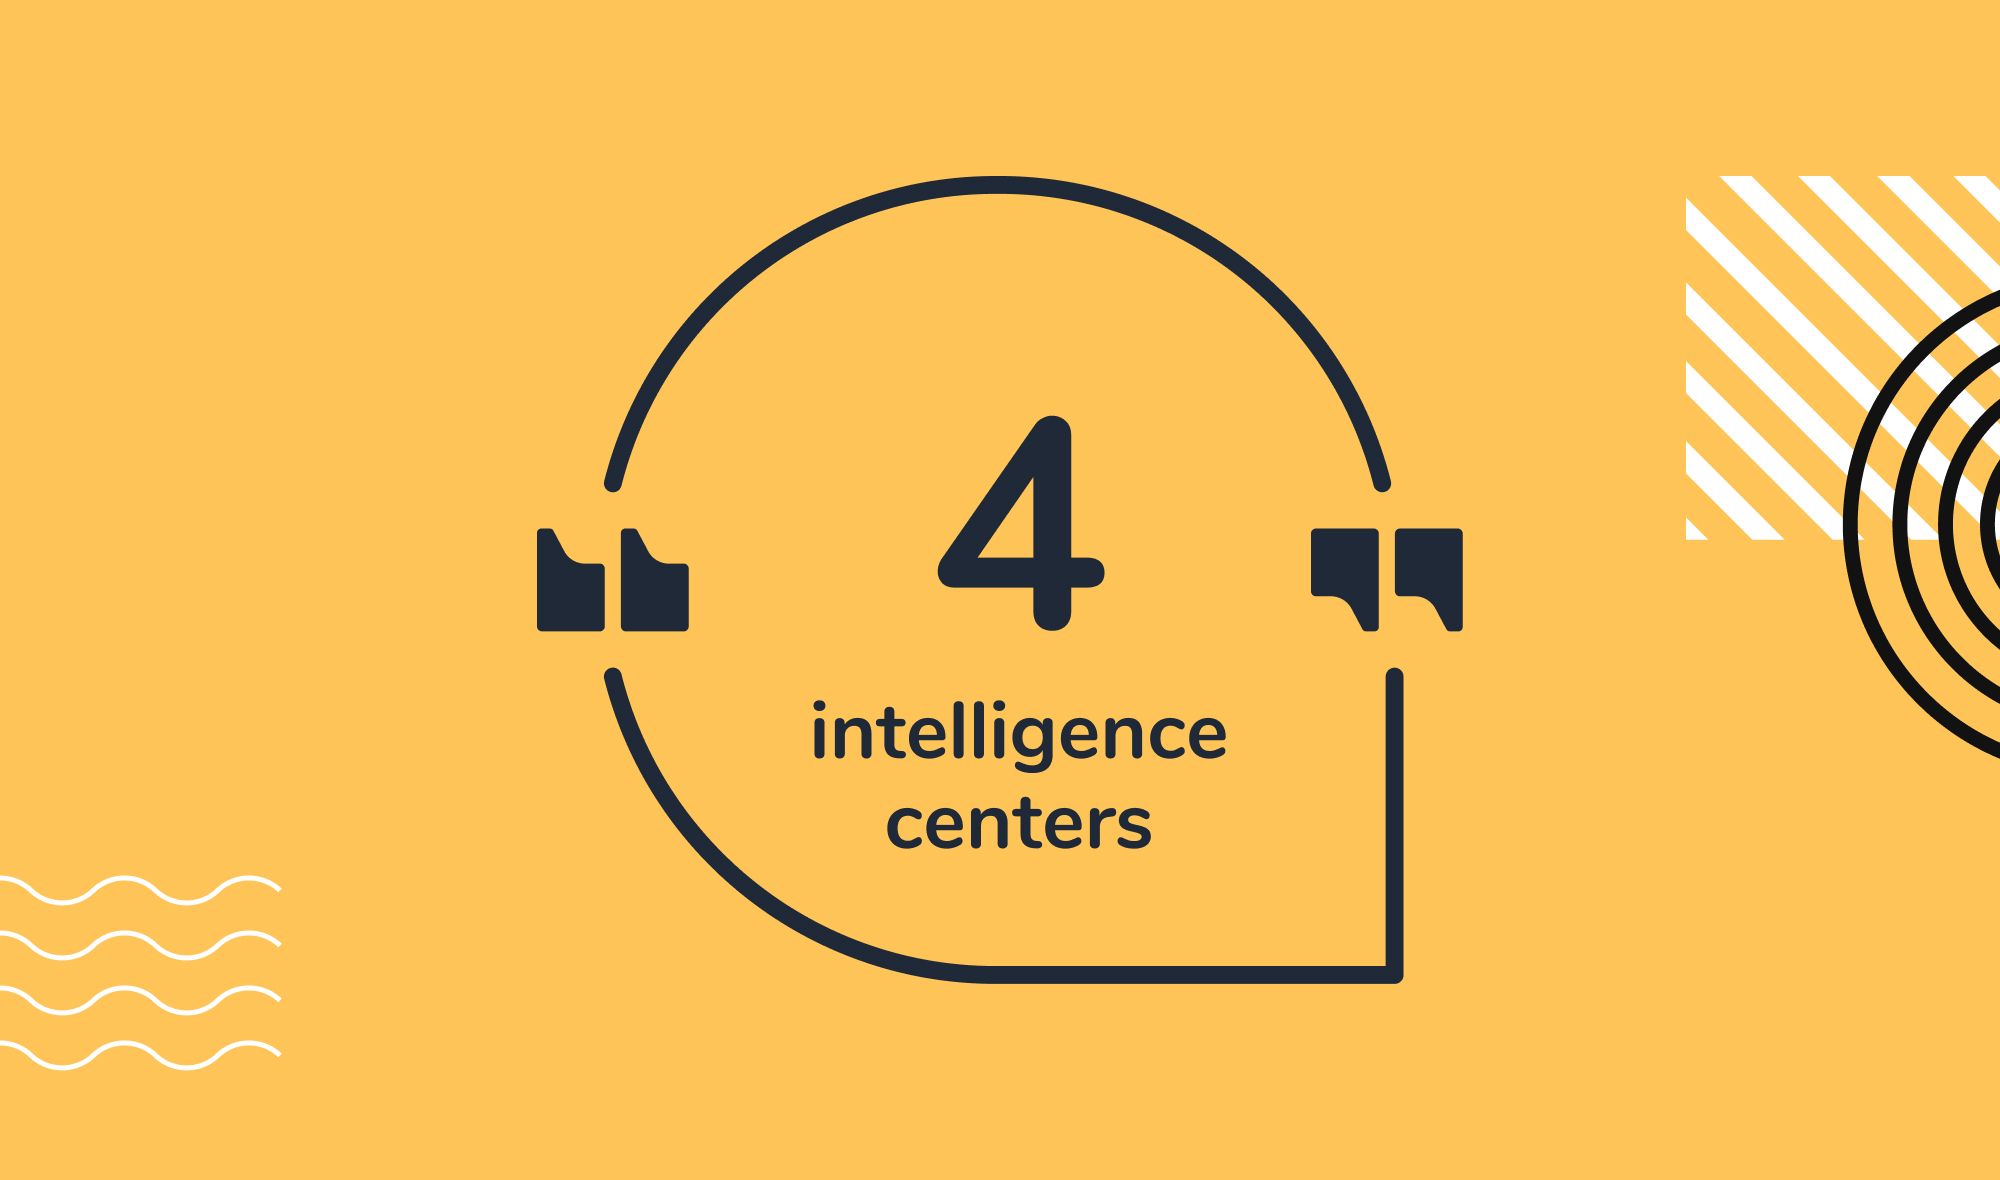 How to center yourself - Four intelligence centers